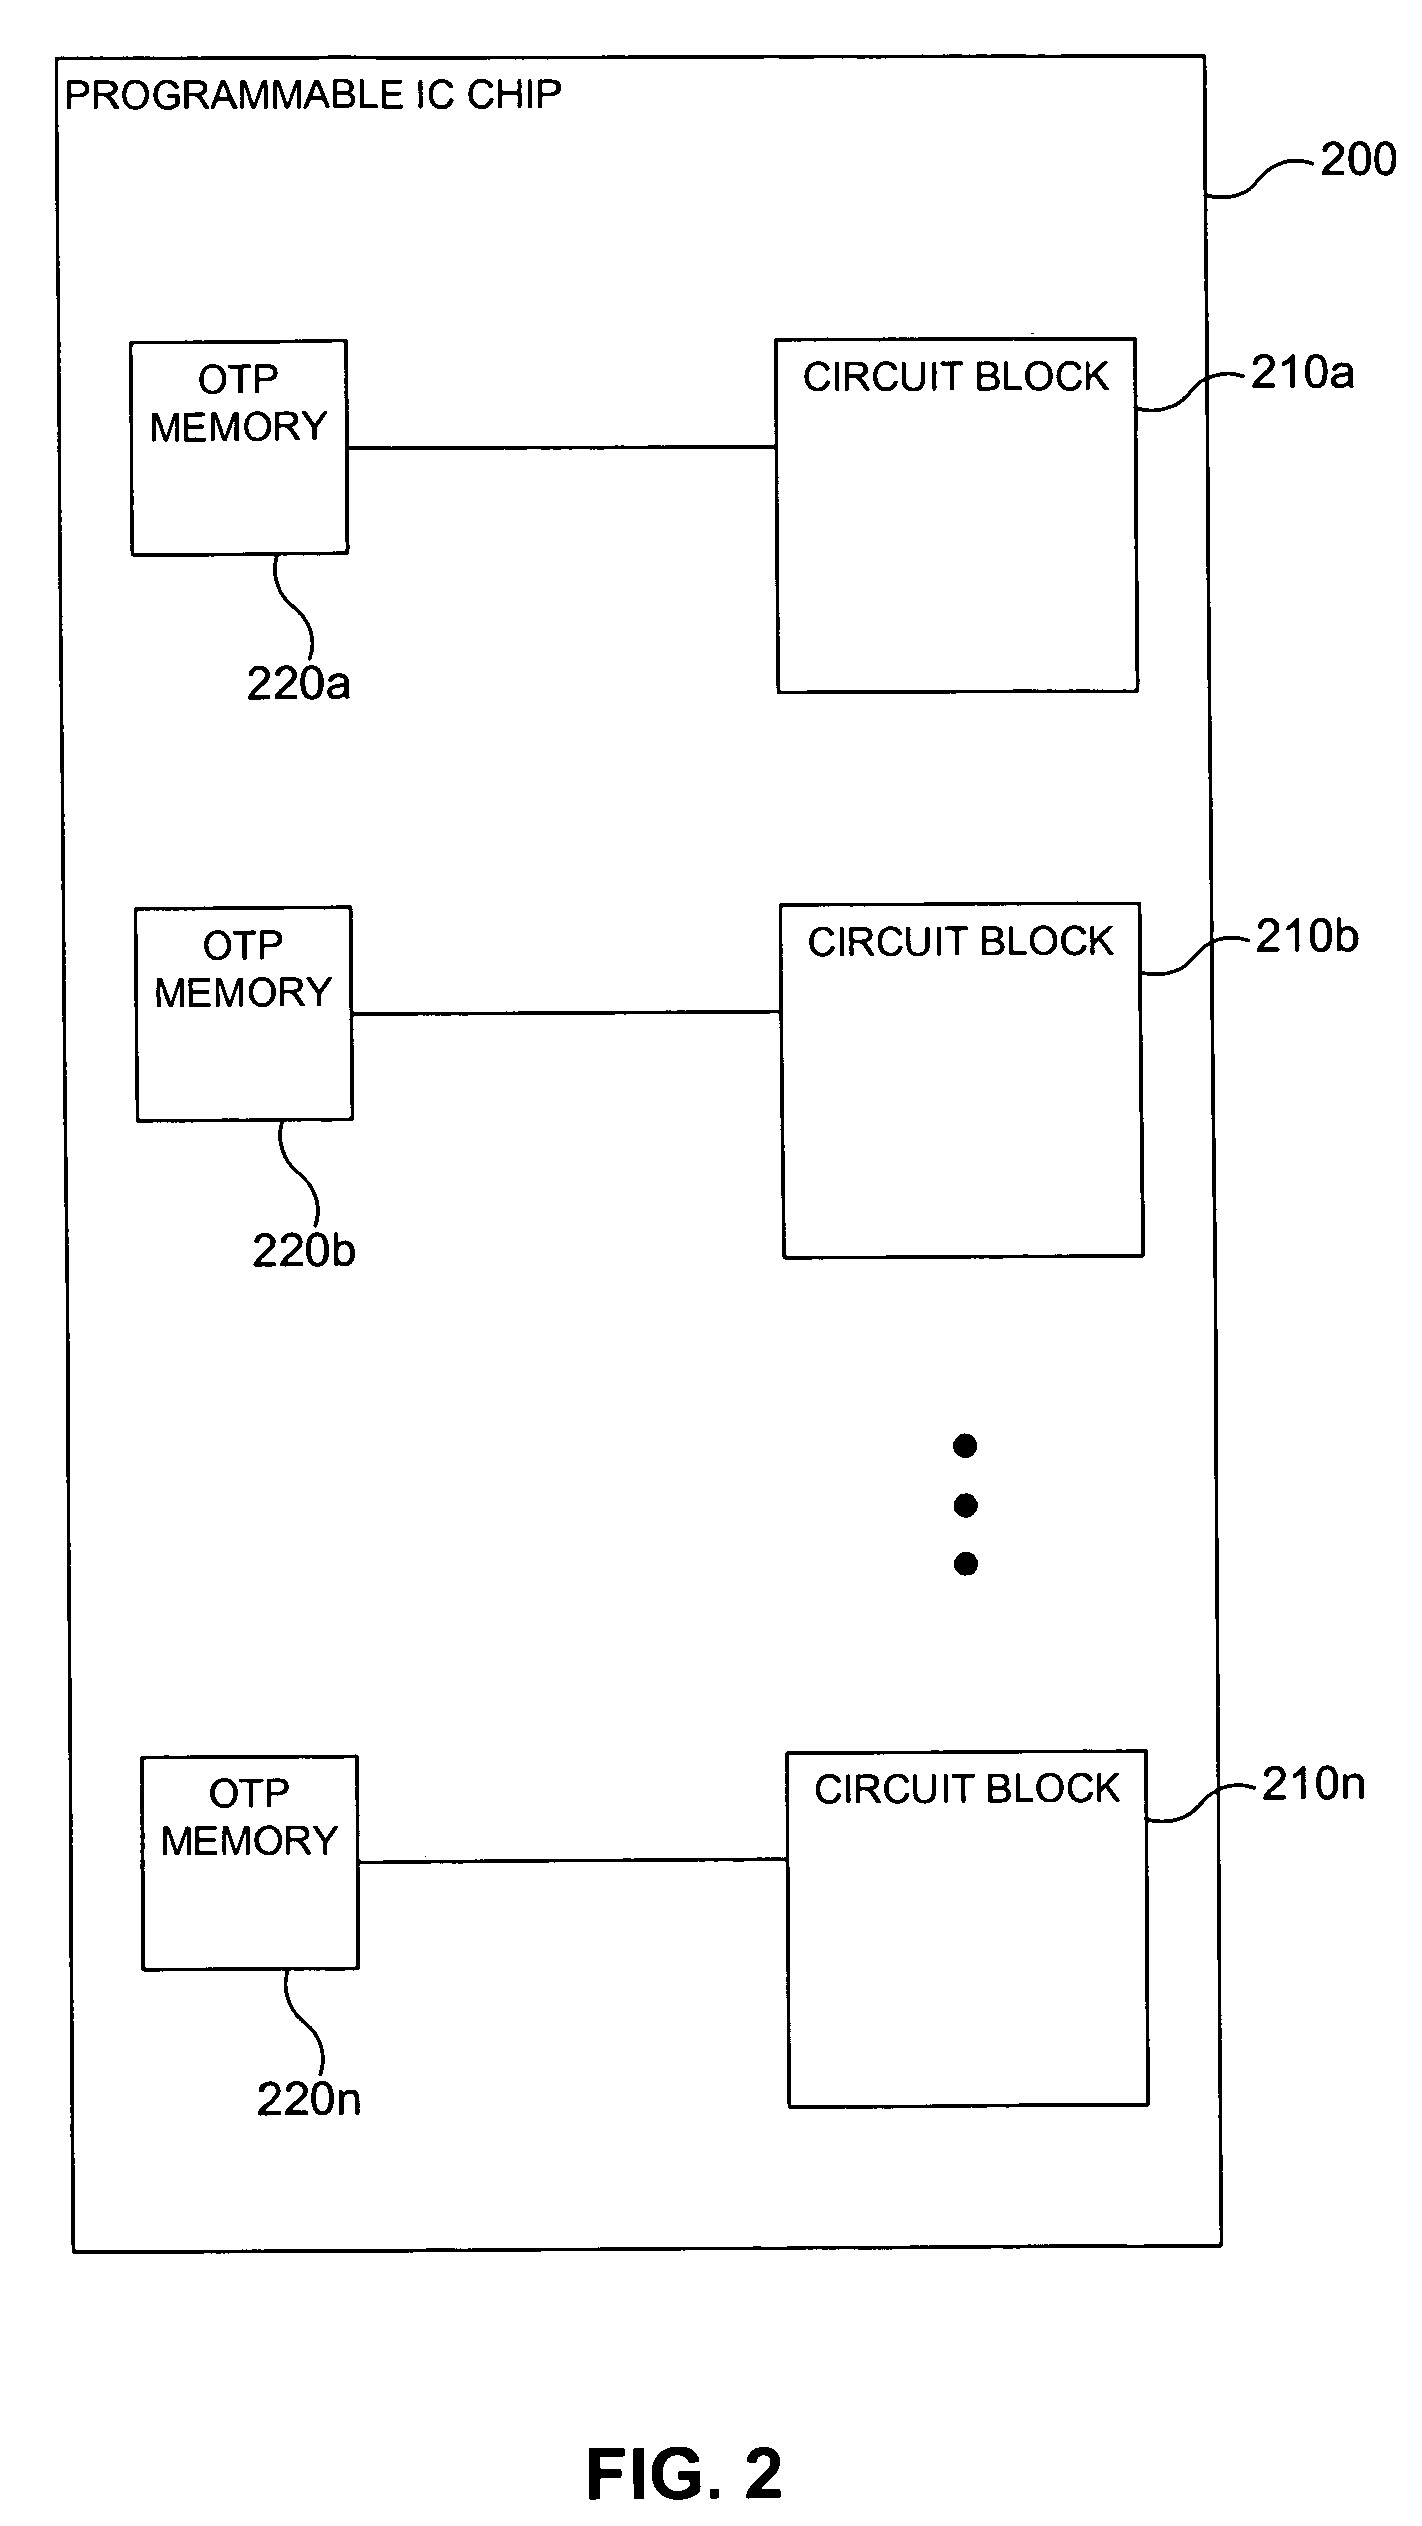 Integrated circuit chip having non-volatile on-chip memories for providing programmable functions and features